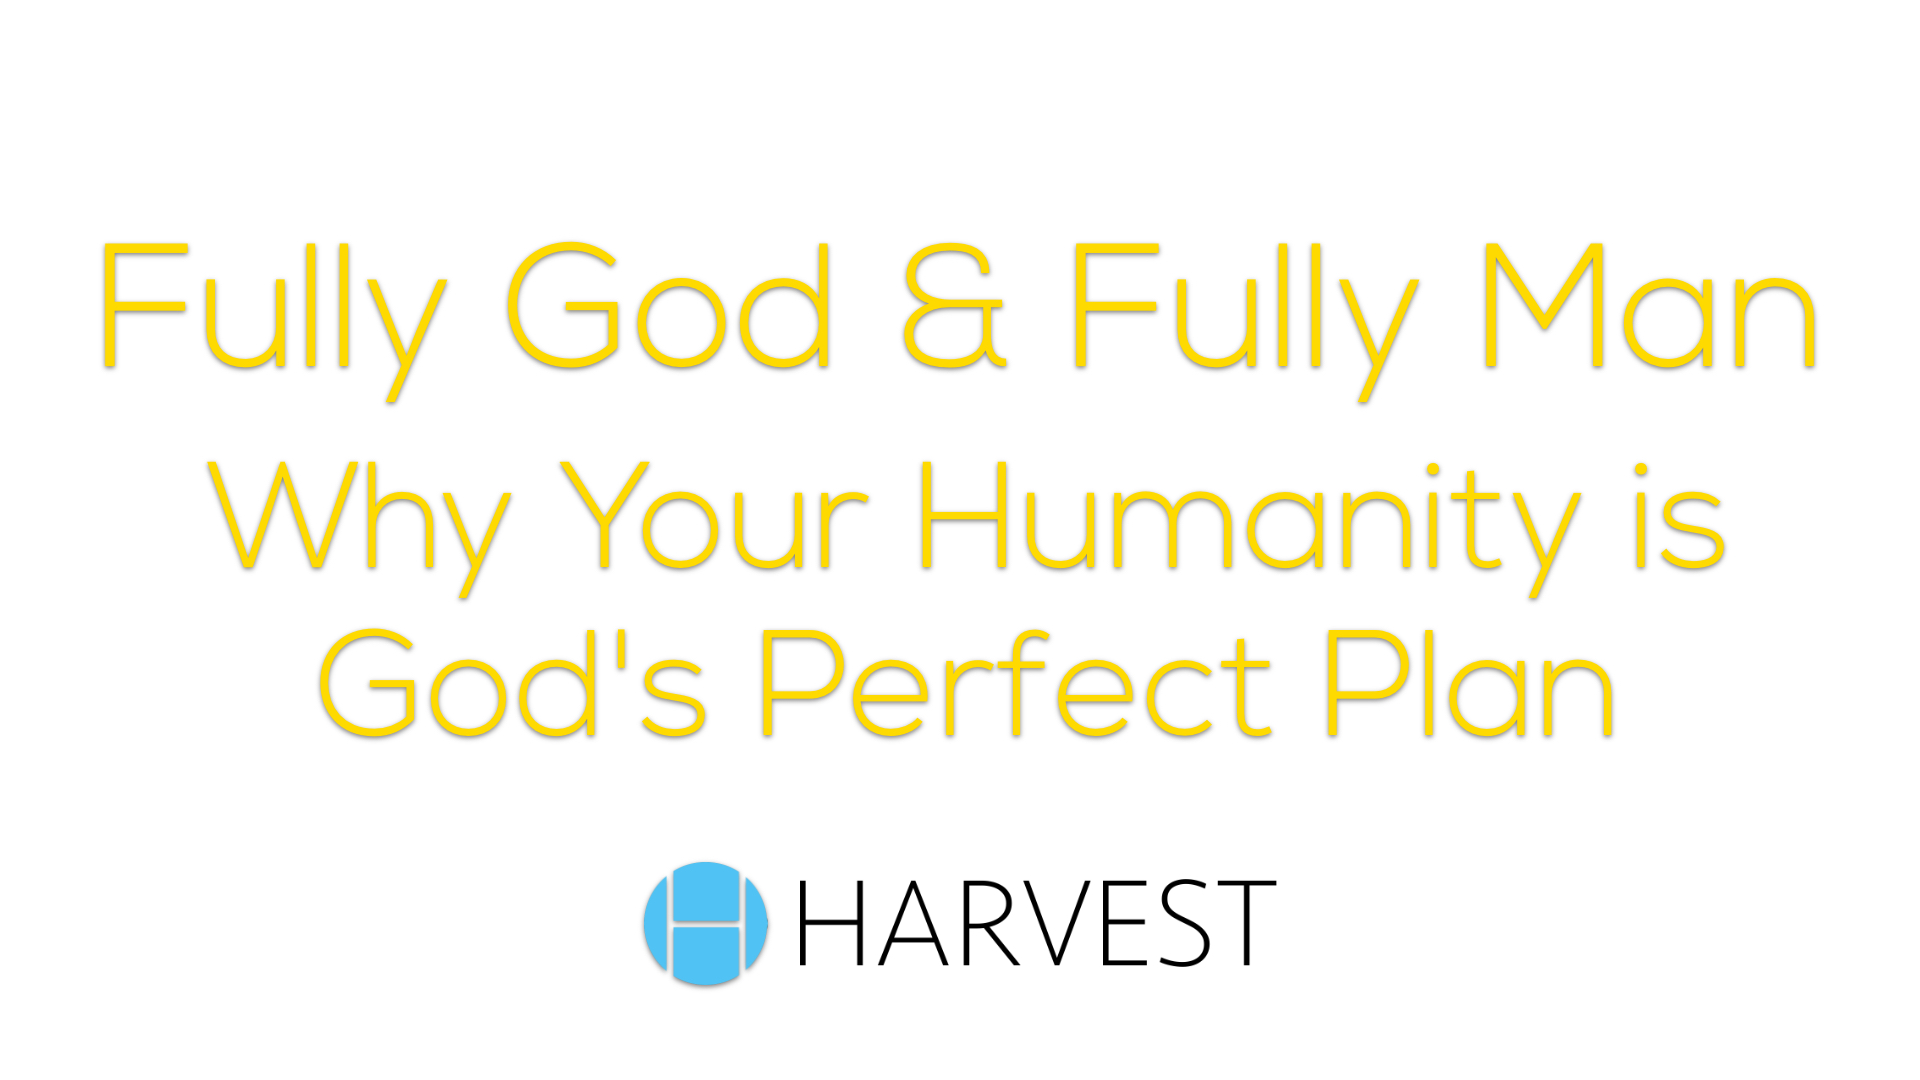 Fully God & Fully Man: Why Your Humanity is God’s Perfect Plan